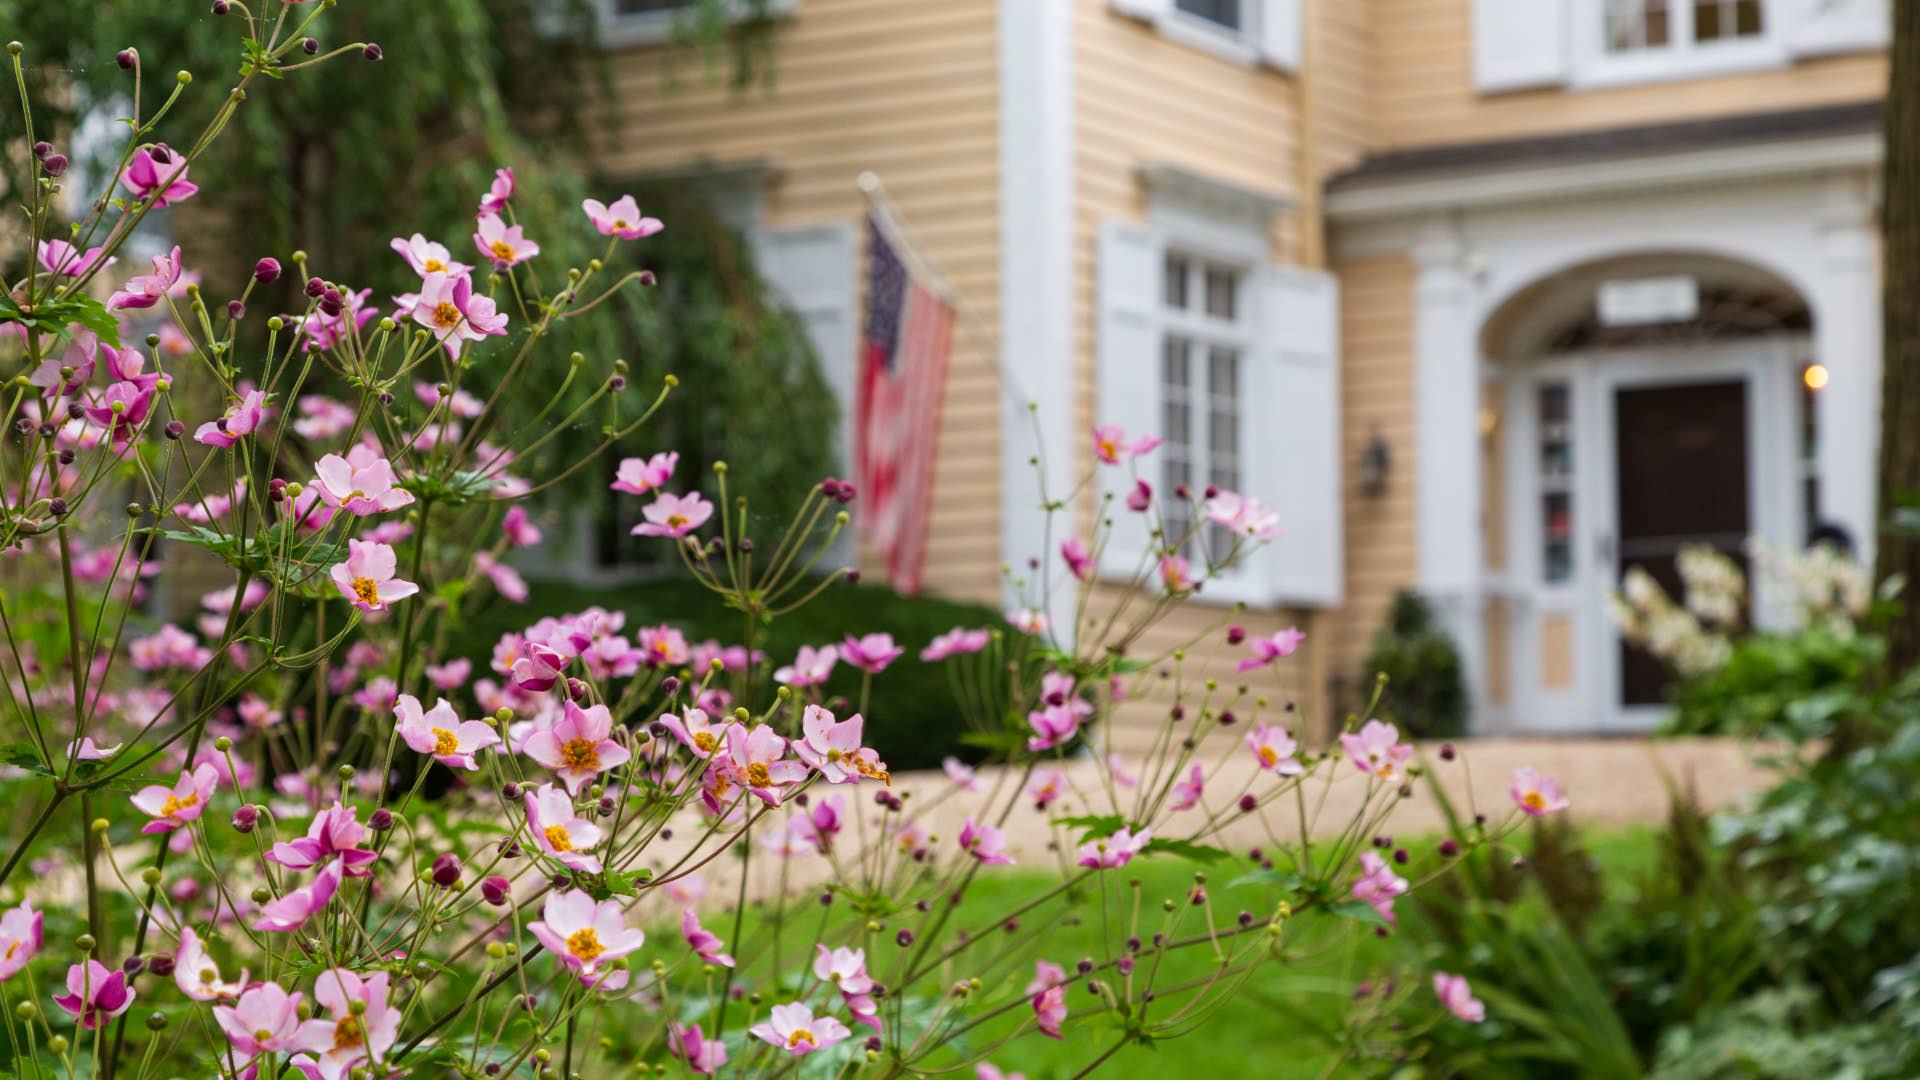 Close up view of light pink flowers with green grass, green trees, and the property in the background